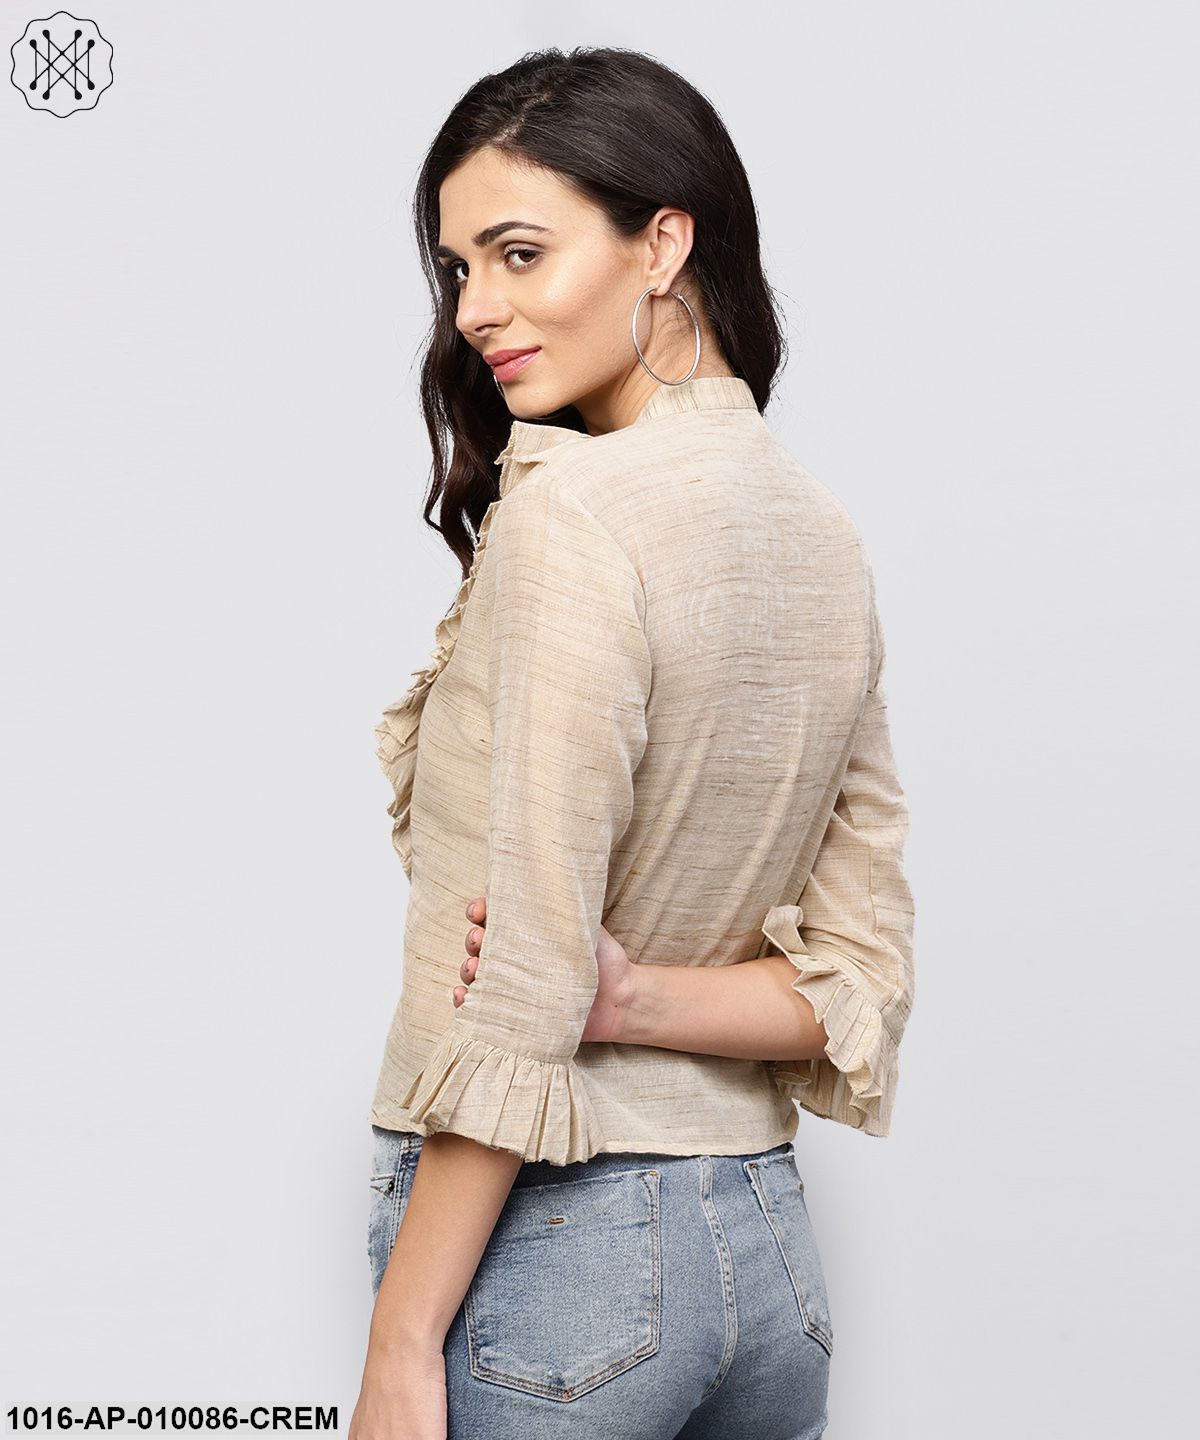 Ruffled Yoke With Open Center Placket Top With Pleated Sleeves And Madarin Collar